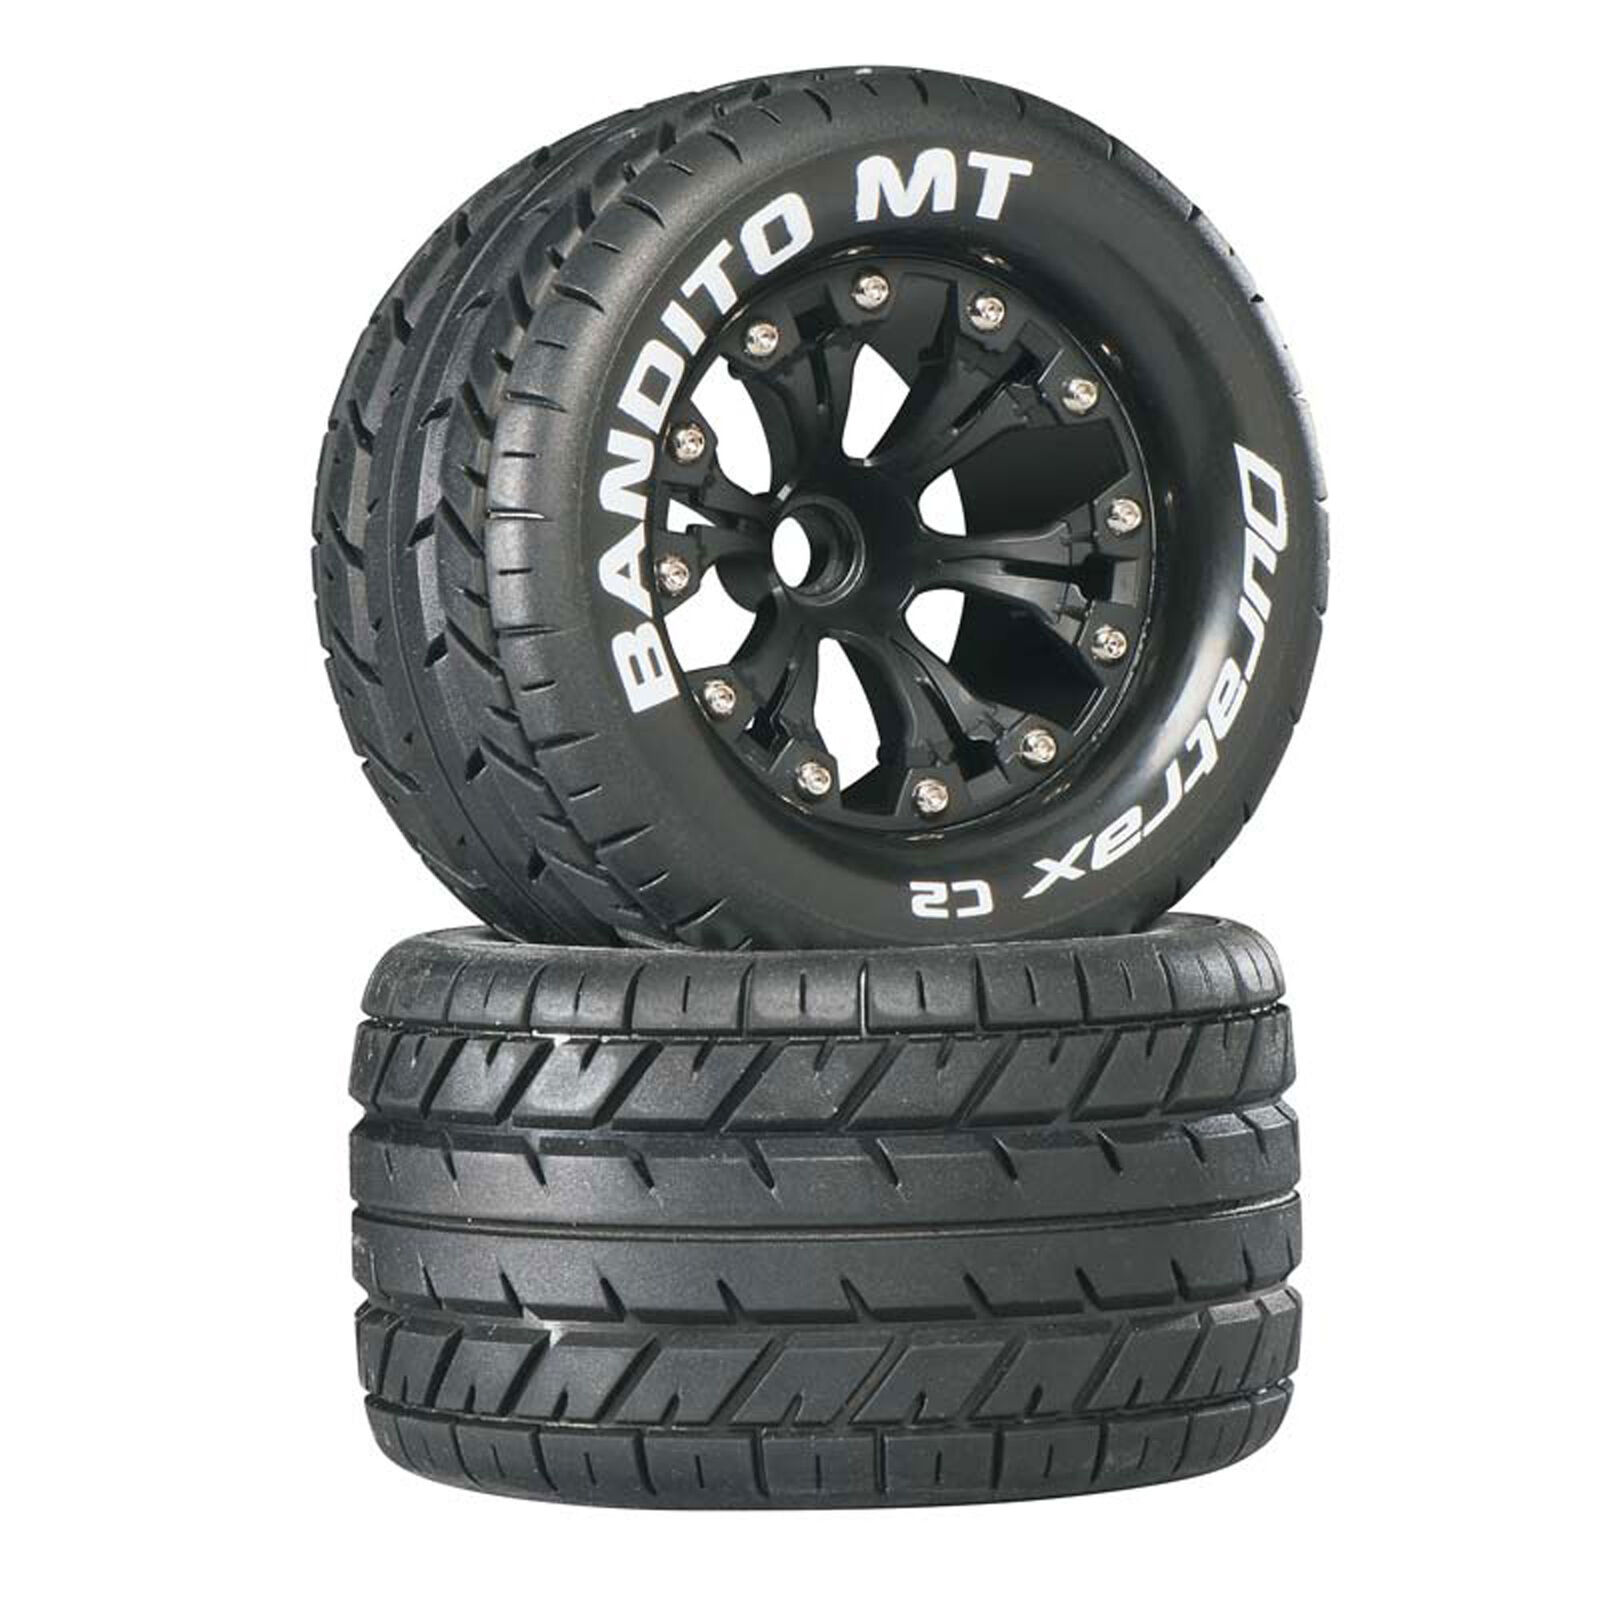 Bandito MT 2.8" 2WD Mounted Front C2 Tires, Black (2)